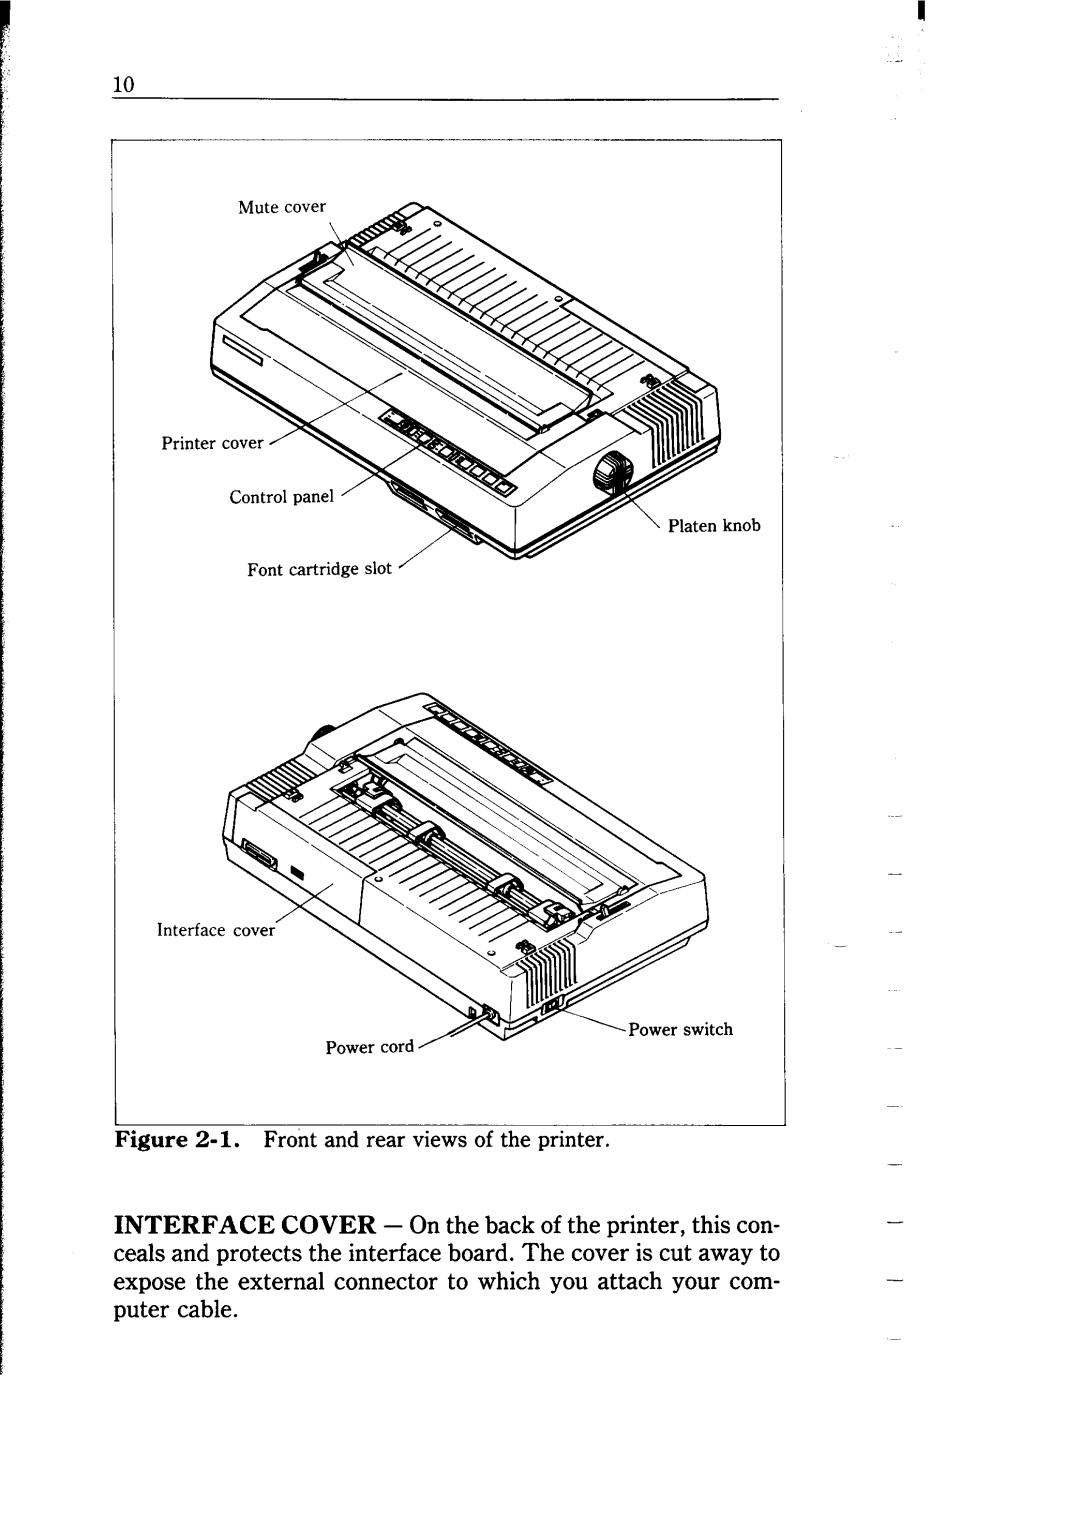 Star Micronics NB-15 user manual 1. Front and rear views of the printer 